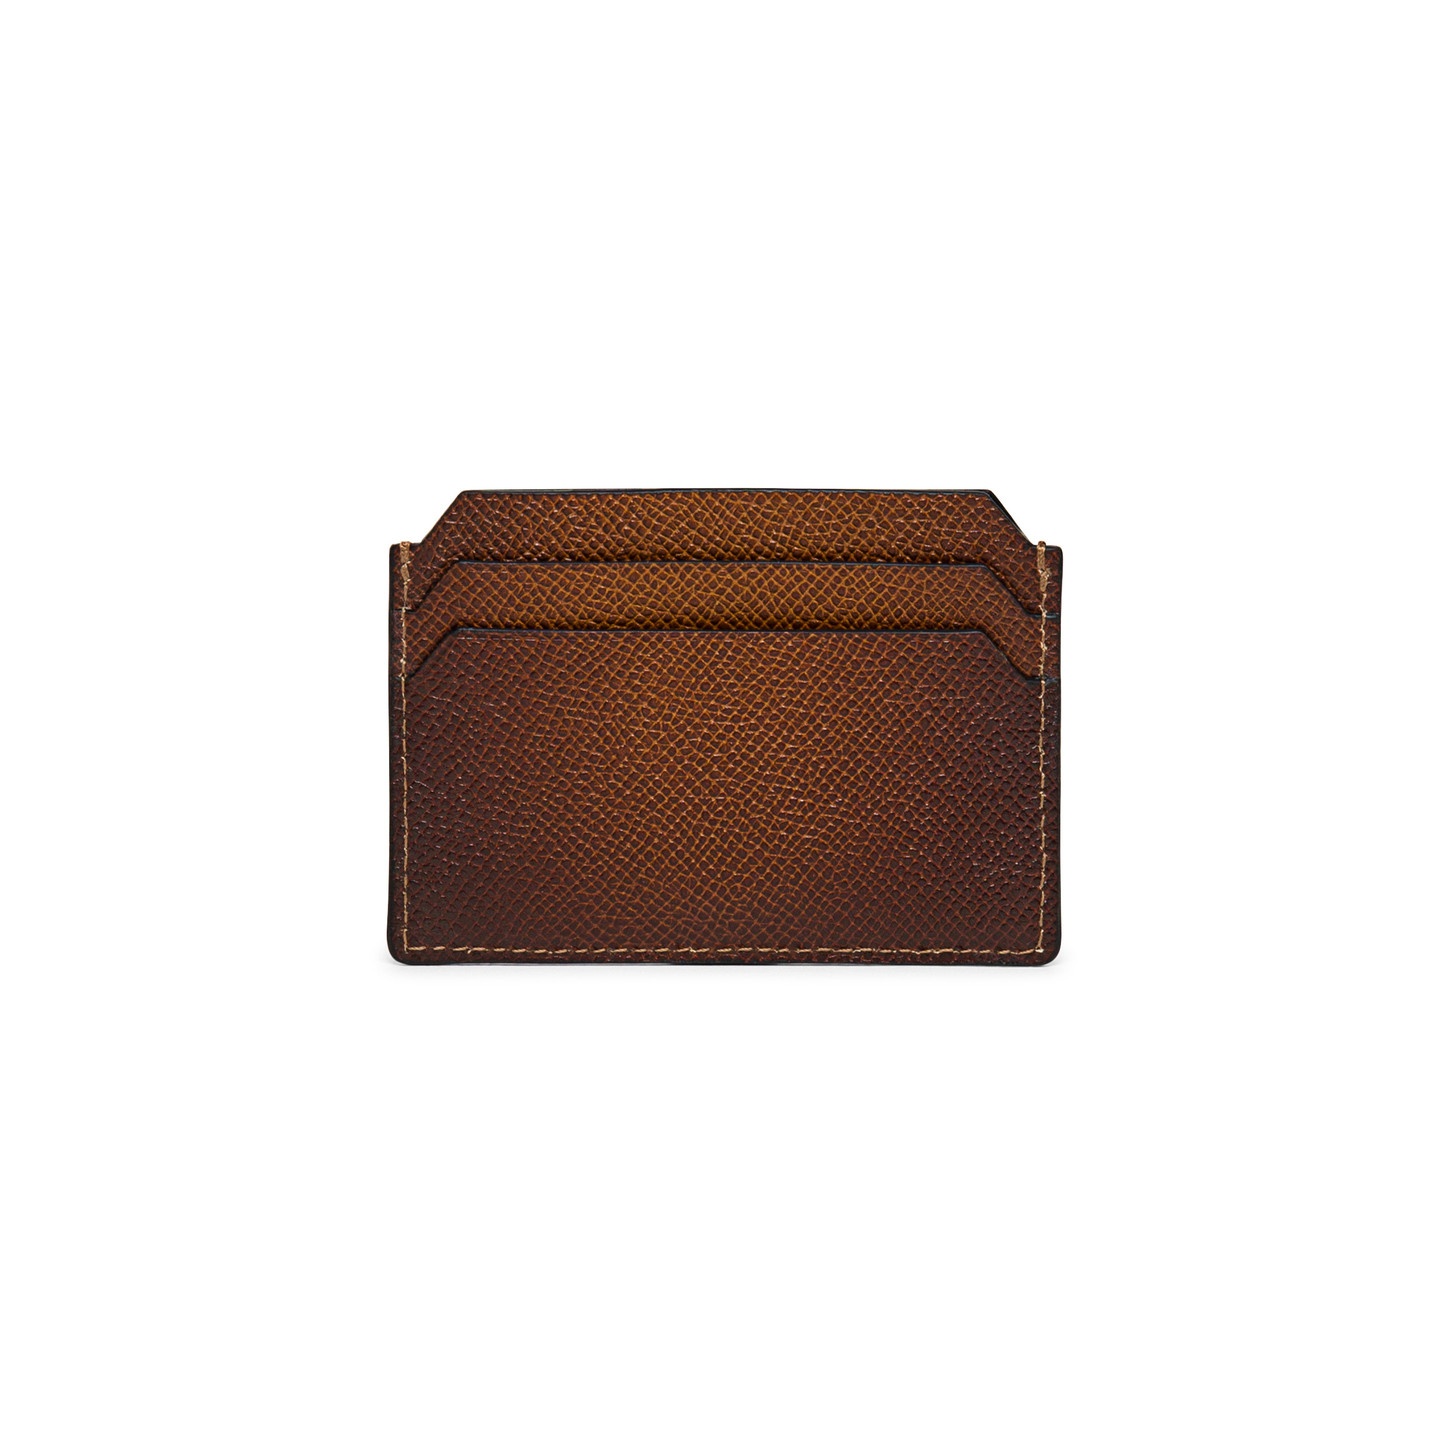 Brown saffiano leather credit card holder - 2